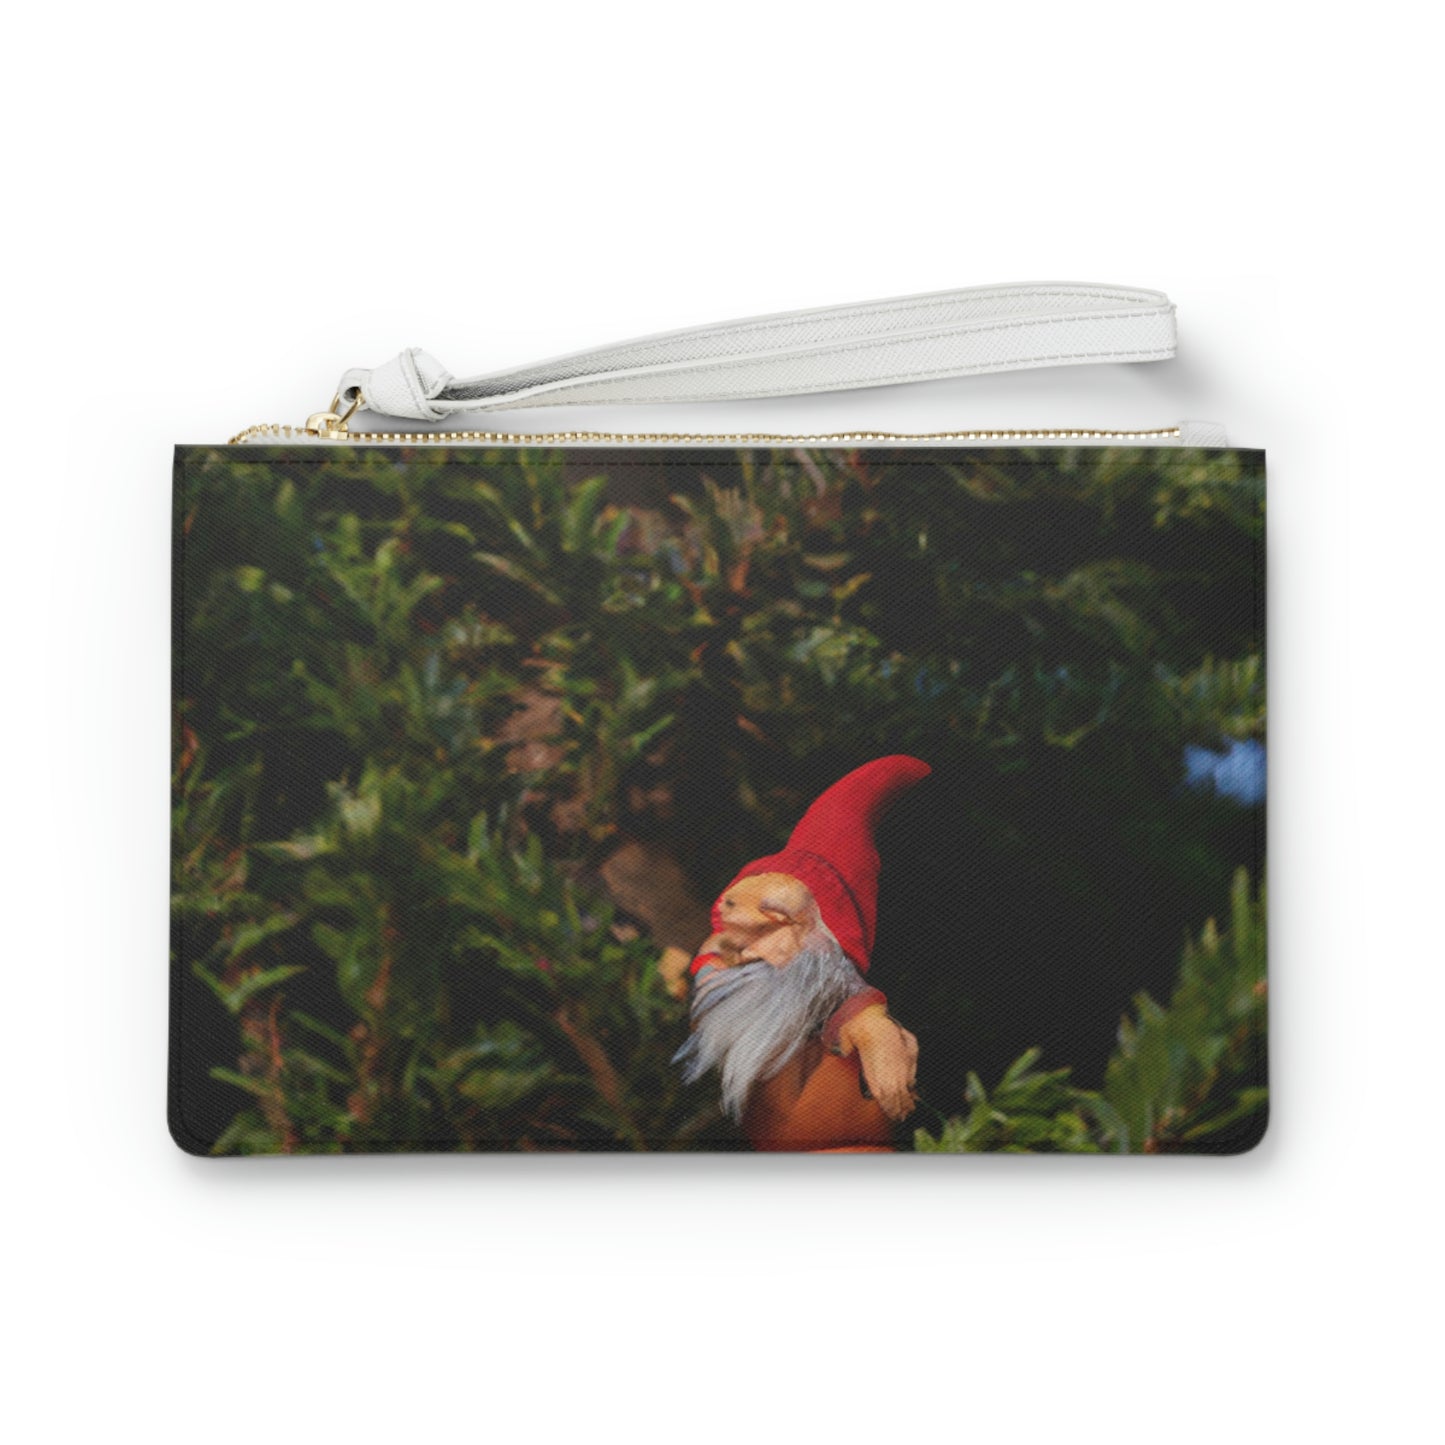 The Gnome's High-Rise Adventure - The Alien Clutch Bag